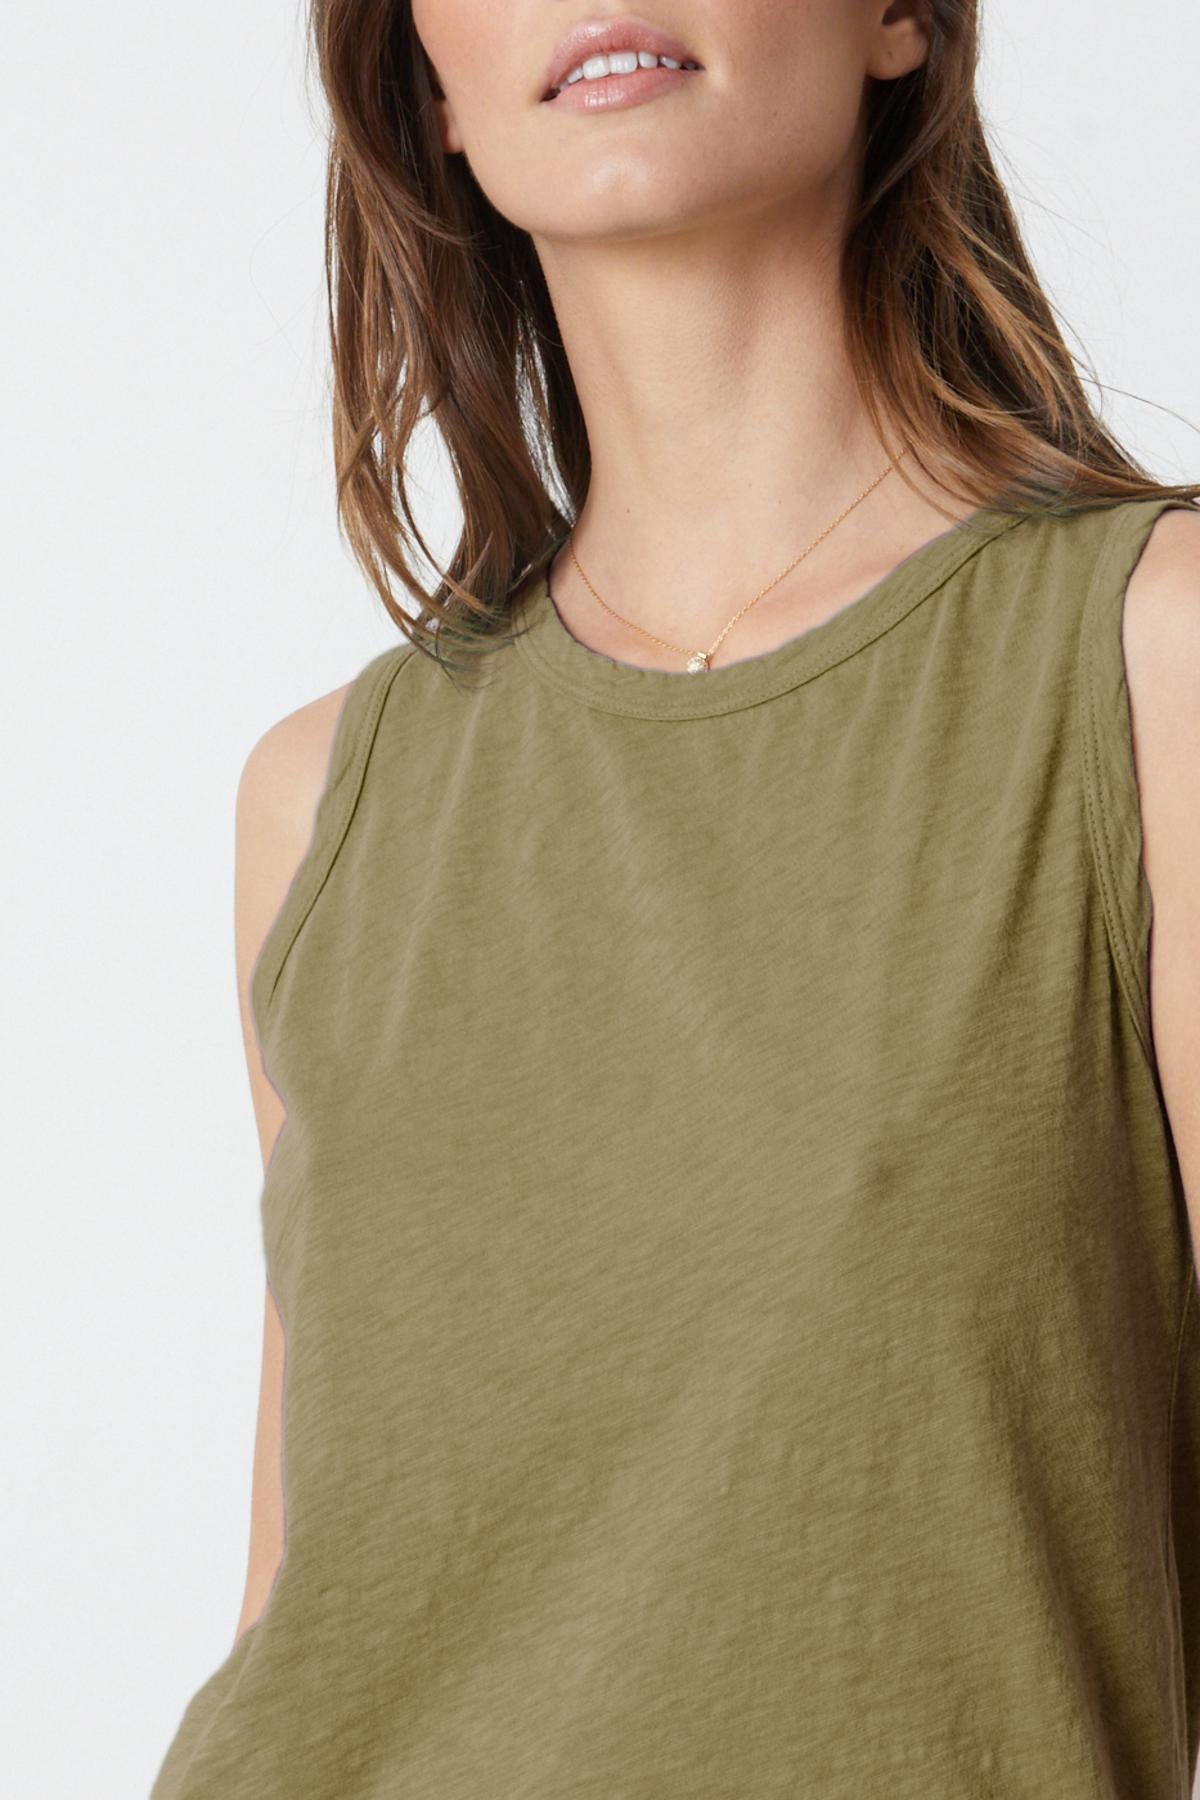 The TAURUS COTTON SLUB TANK in olive green is sleeveless and made from cotton slub by Velvet by Graham & Spencer.-35783162331329